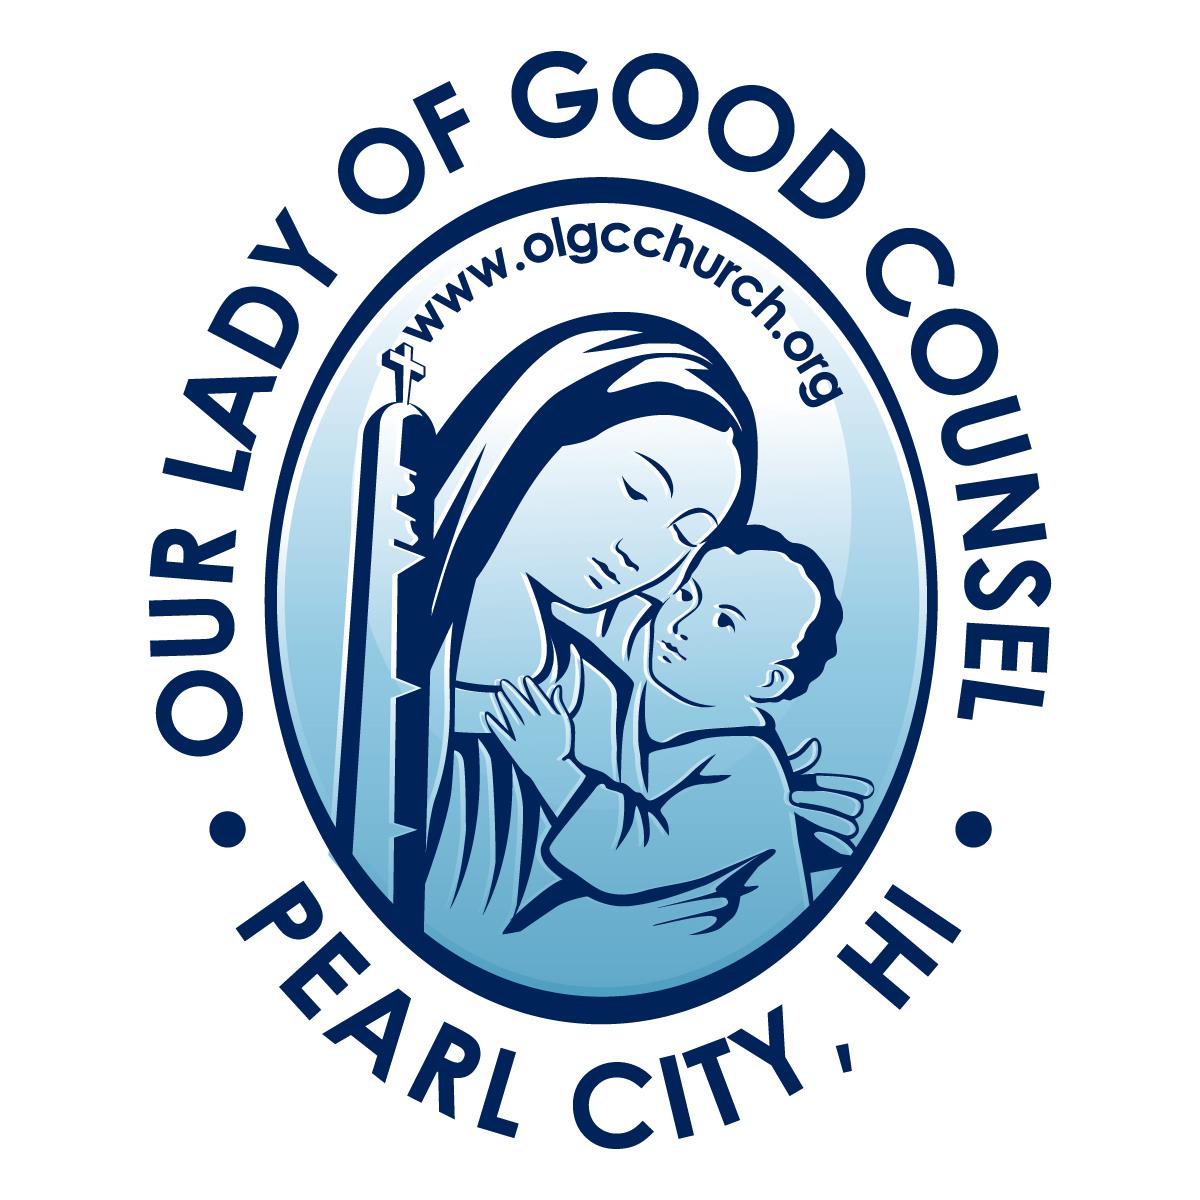 Our Lady of Good Counsel Food Pantry